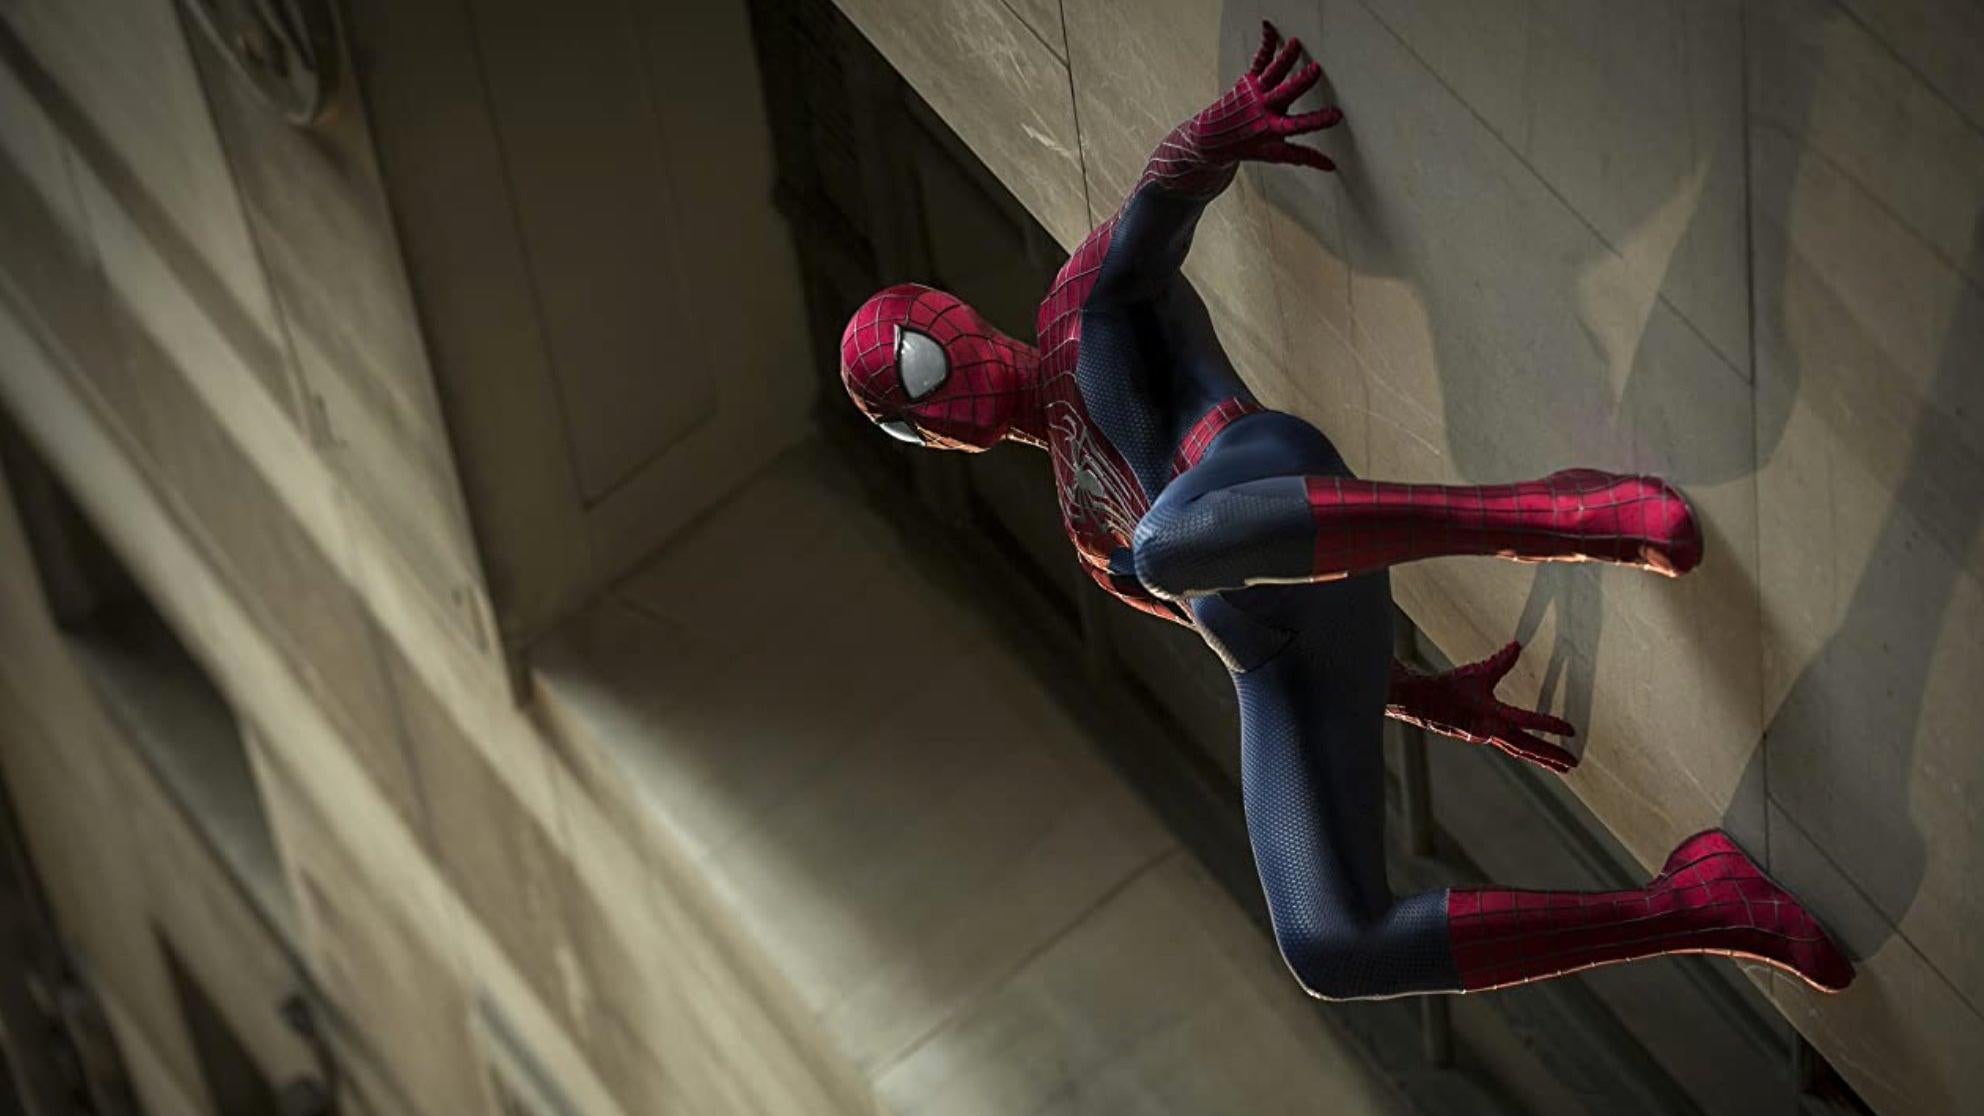 The Amazing Spider-Man 3 is hanging around for some reason. (Image: Sony Pictures)